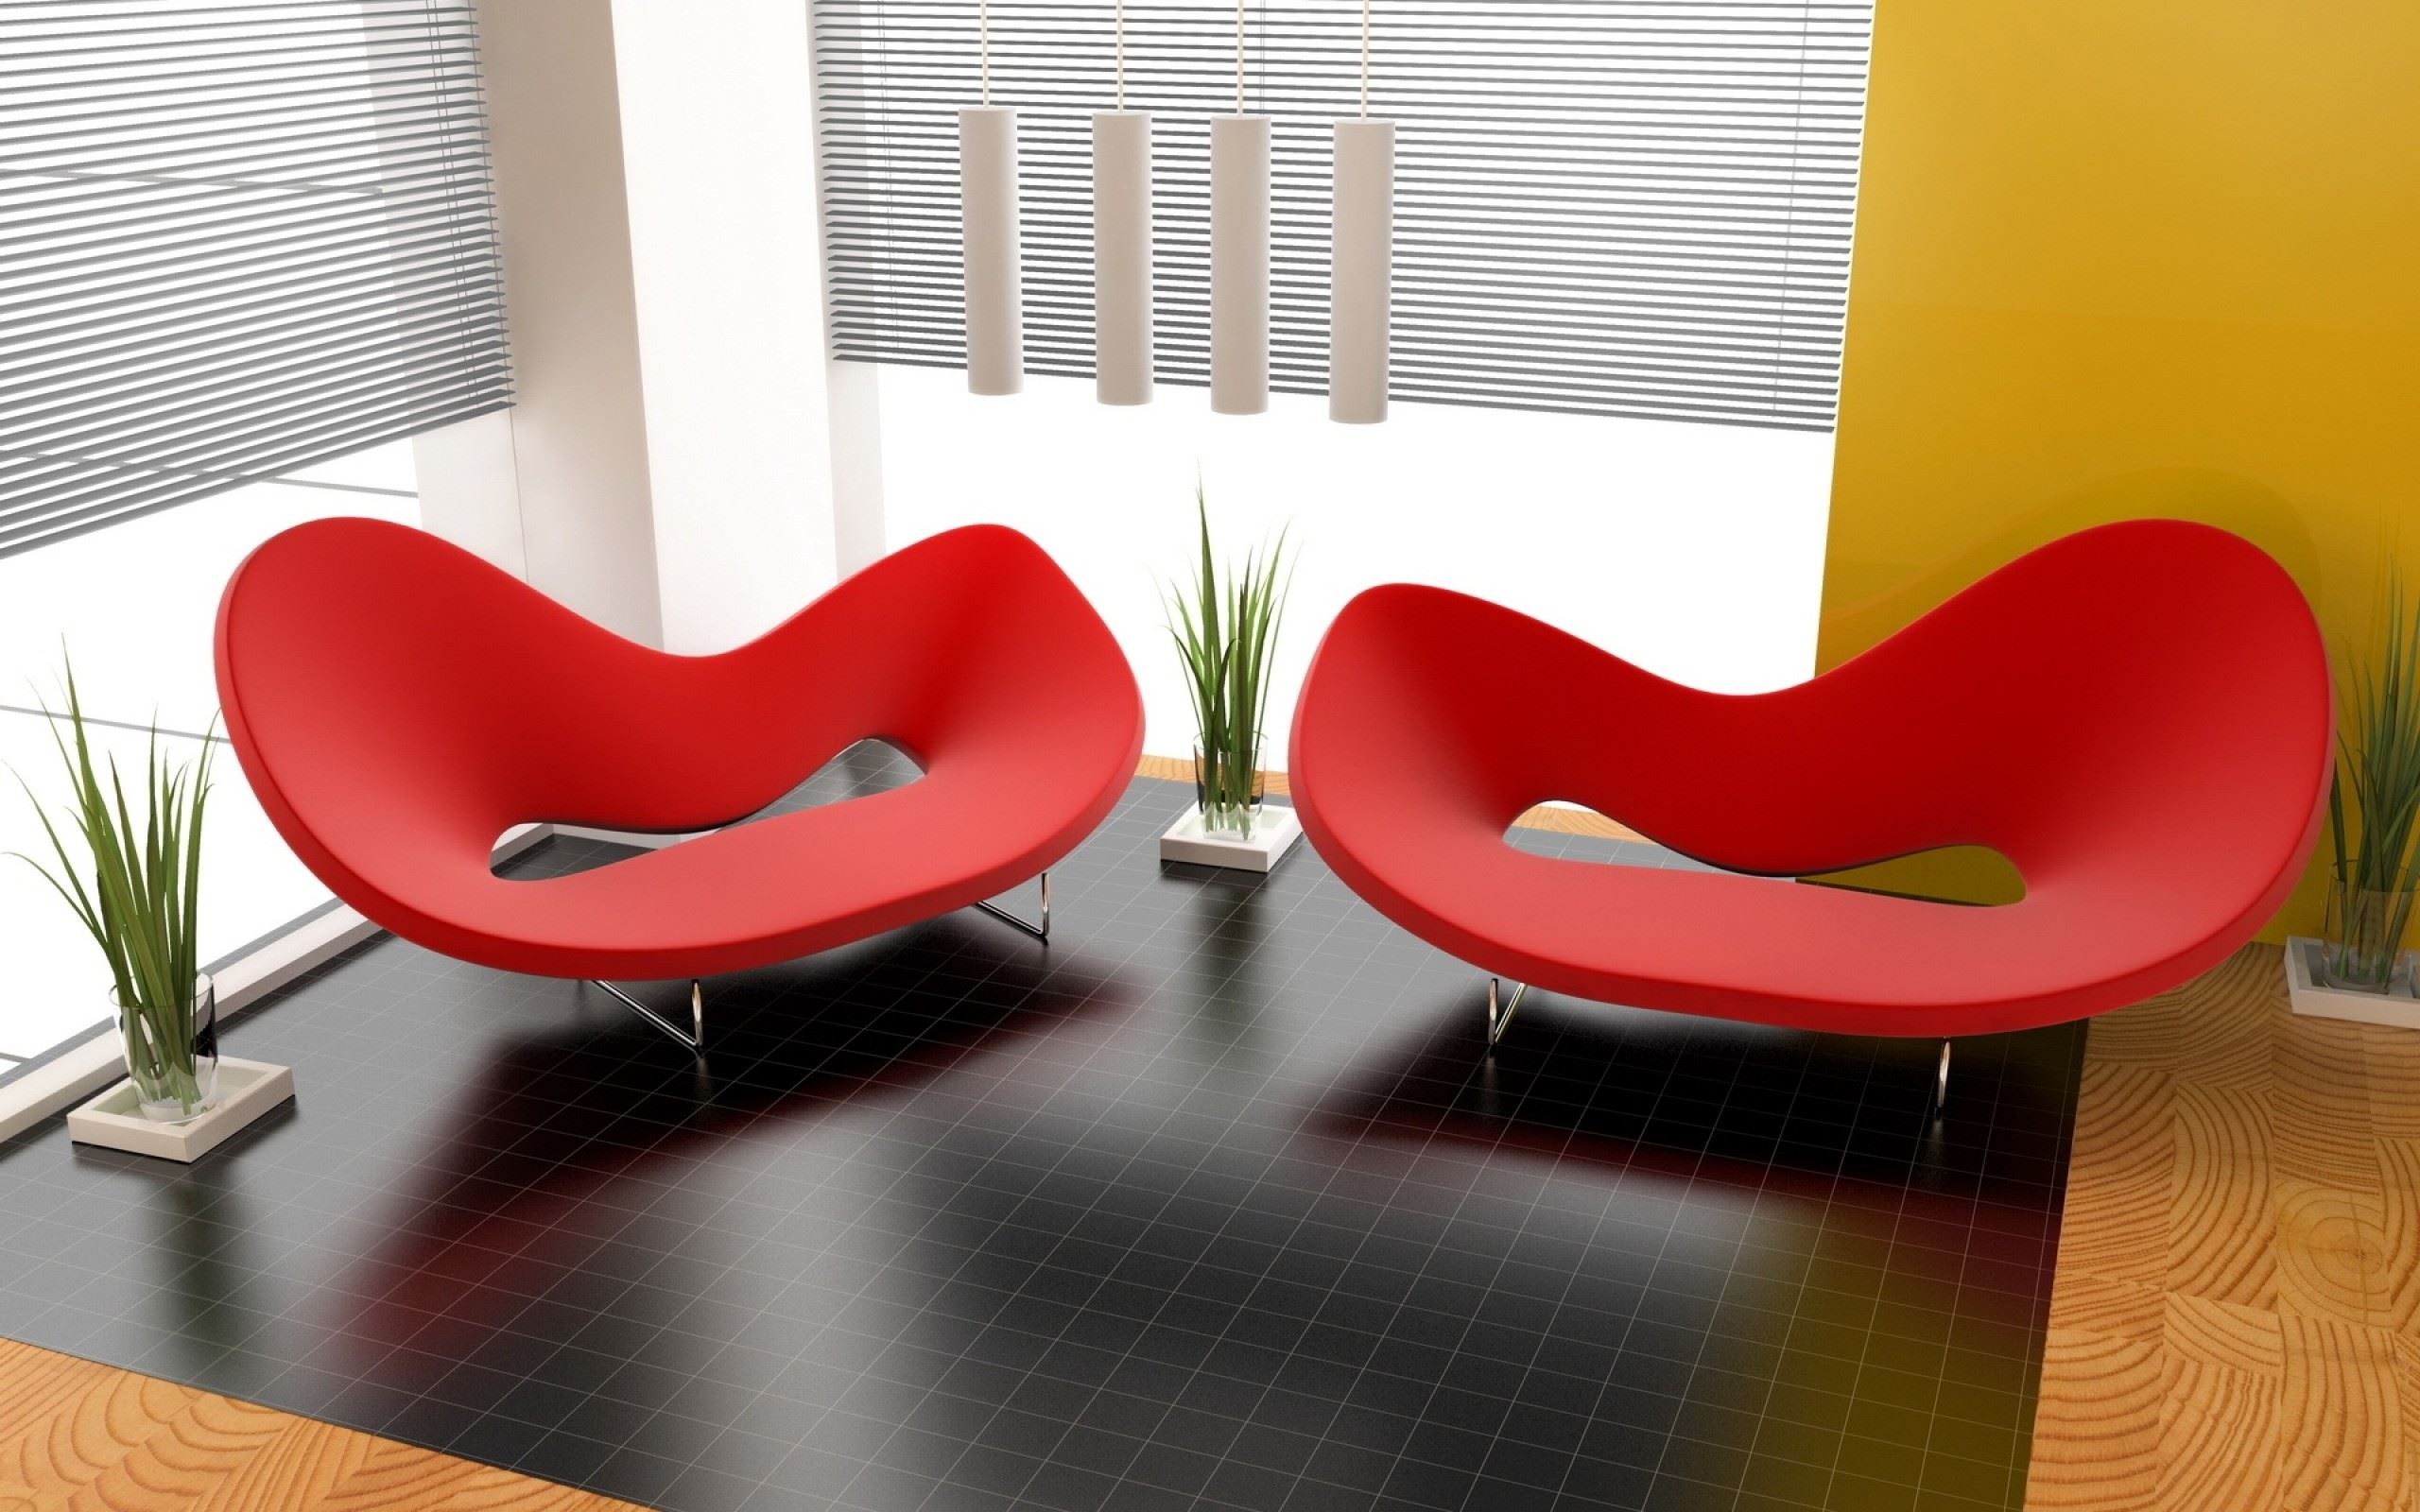 man made, room, chair, furniture, red